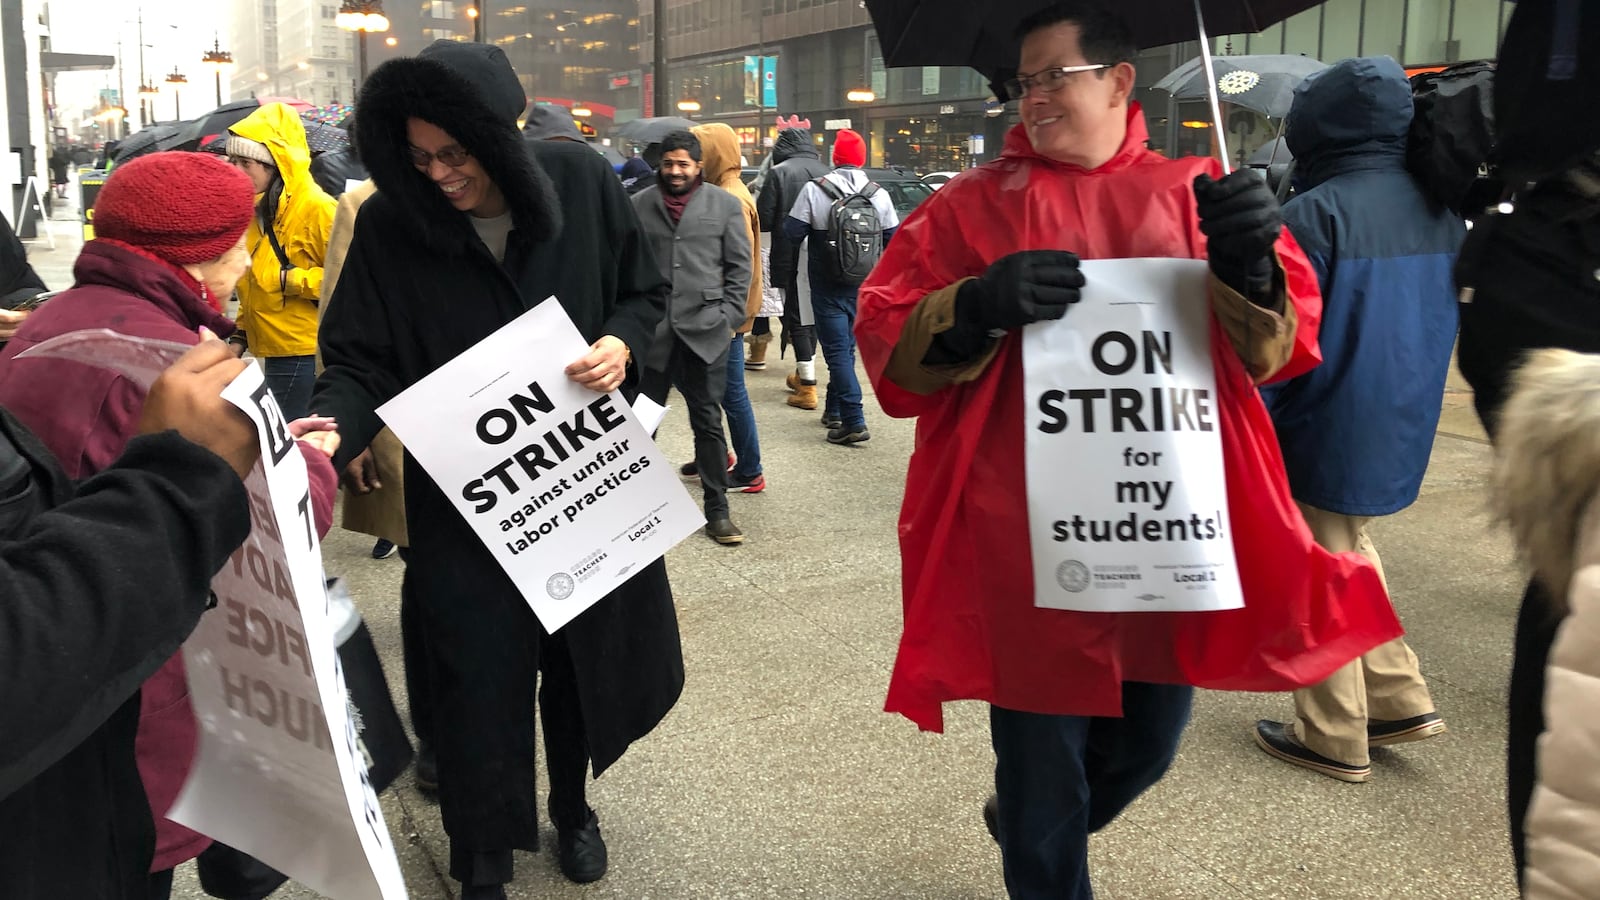 Chicago mayoral candidate Toni Preckwinkle, left, joined striking Chicago International Charter Schools teachers on a picket line at the Illinois Network of Charter Schools on Thursday, Feb. 7, 2019.